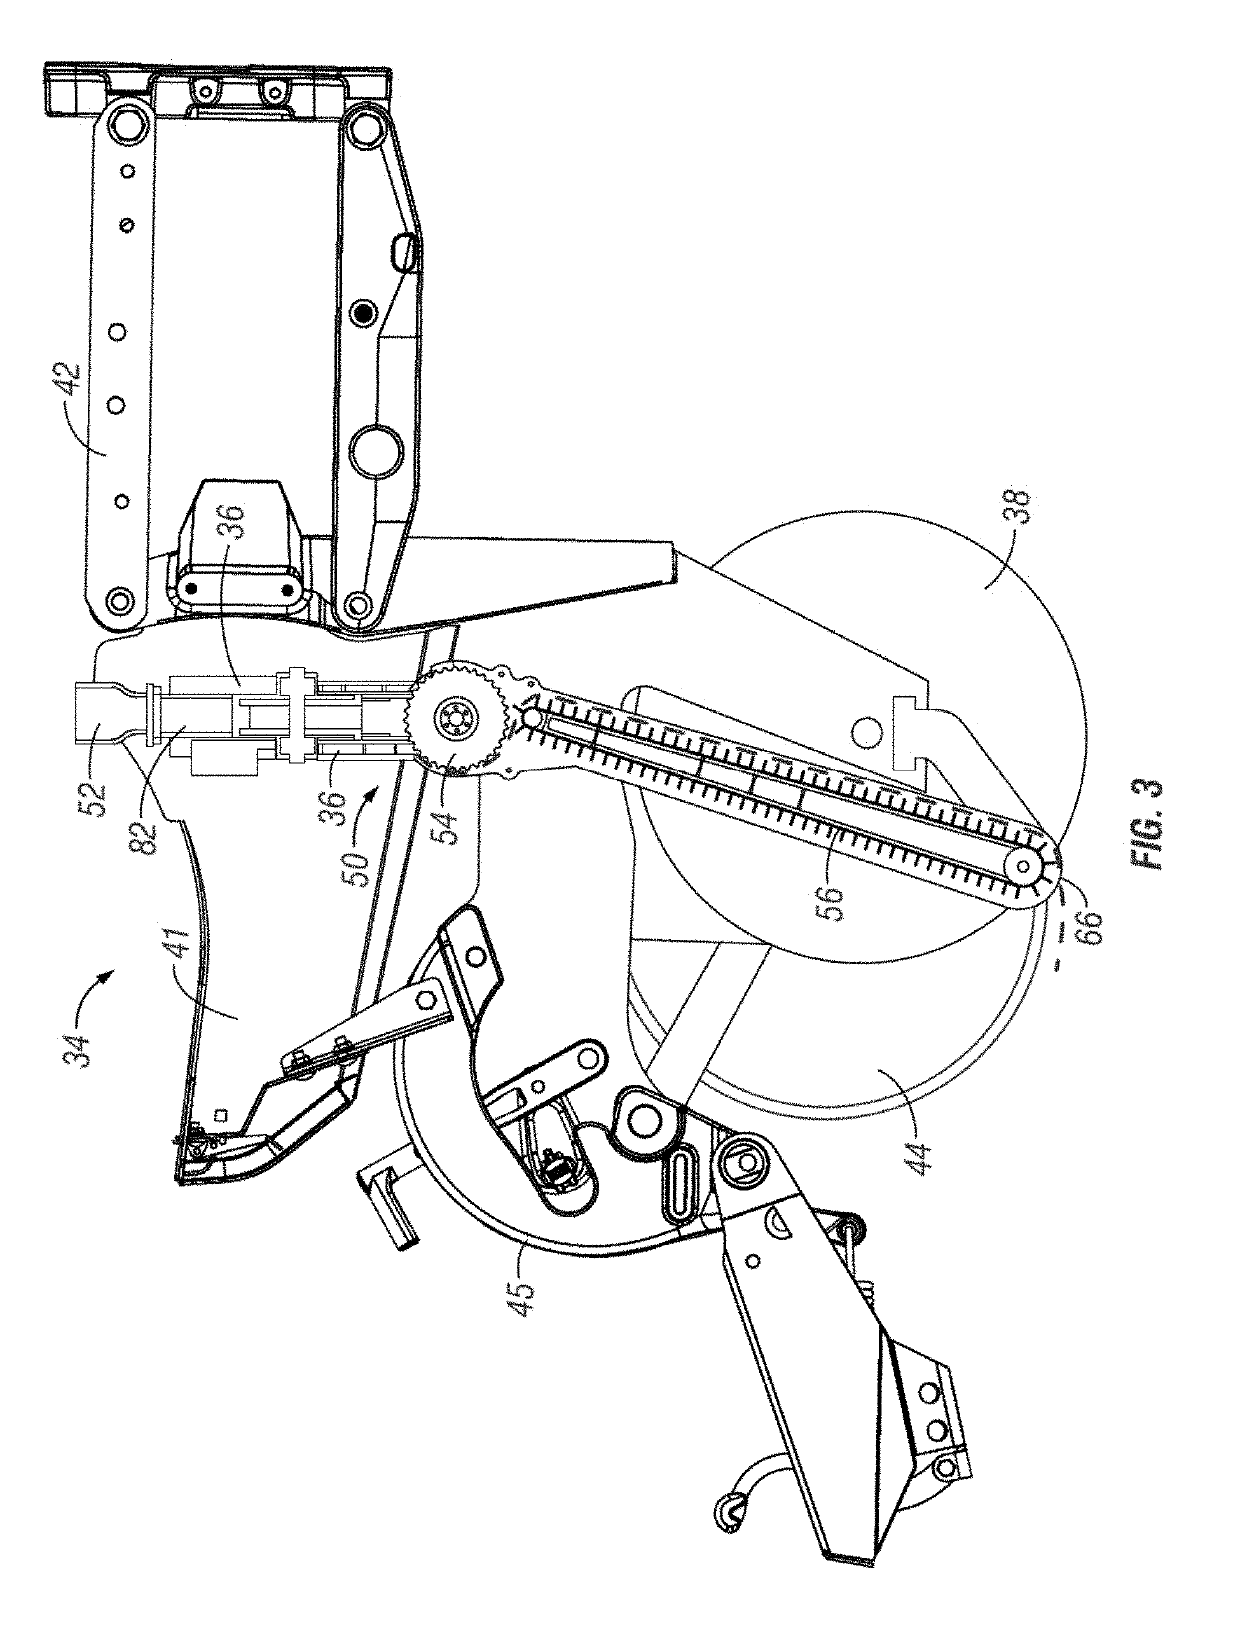 Planter with high speed seed delivery apparatus